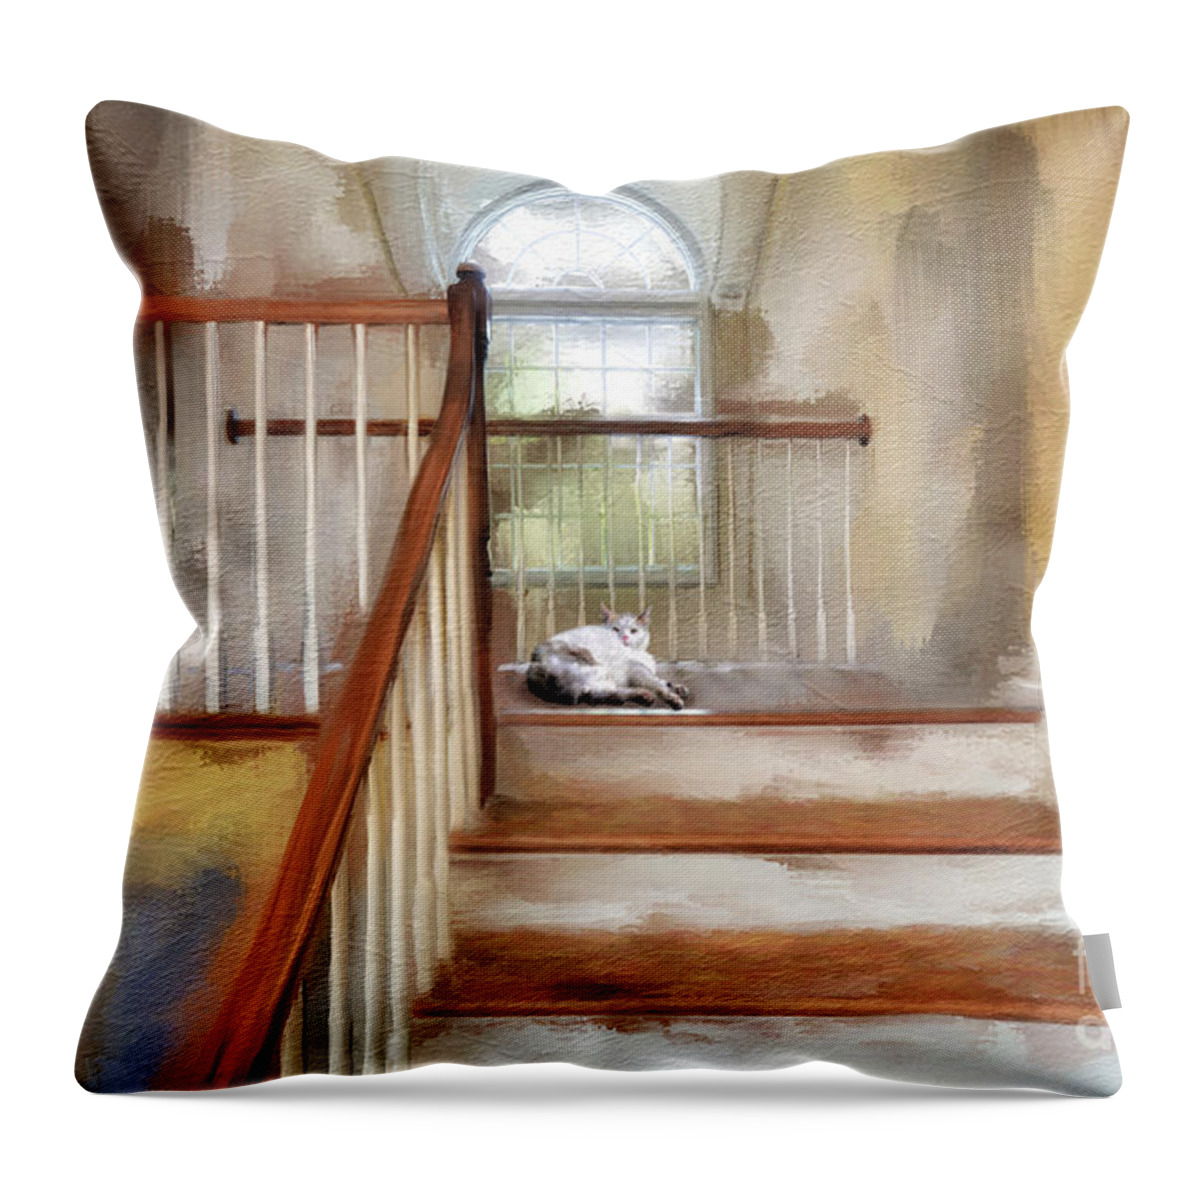 Step Throw Pillow featuring the digital art Where's Kitty by Lois Bryan